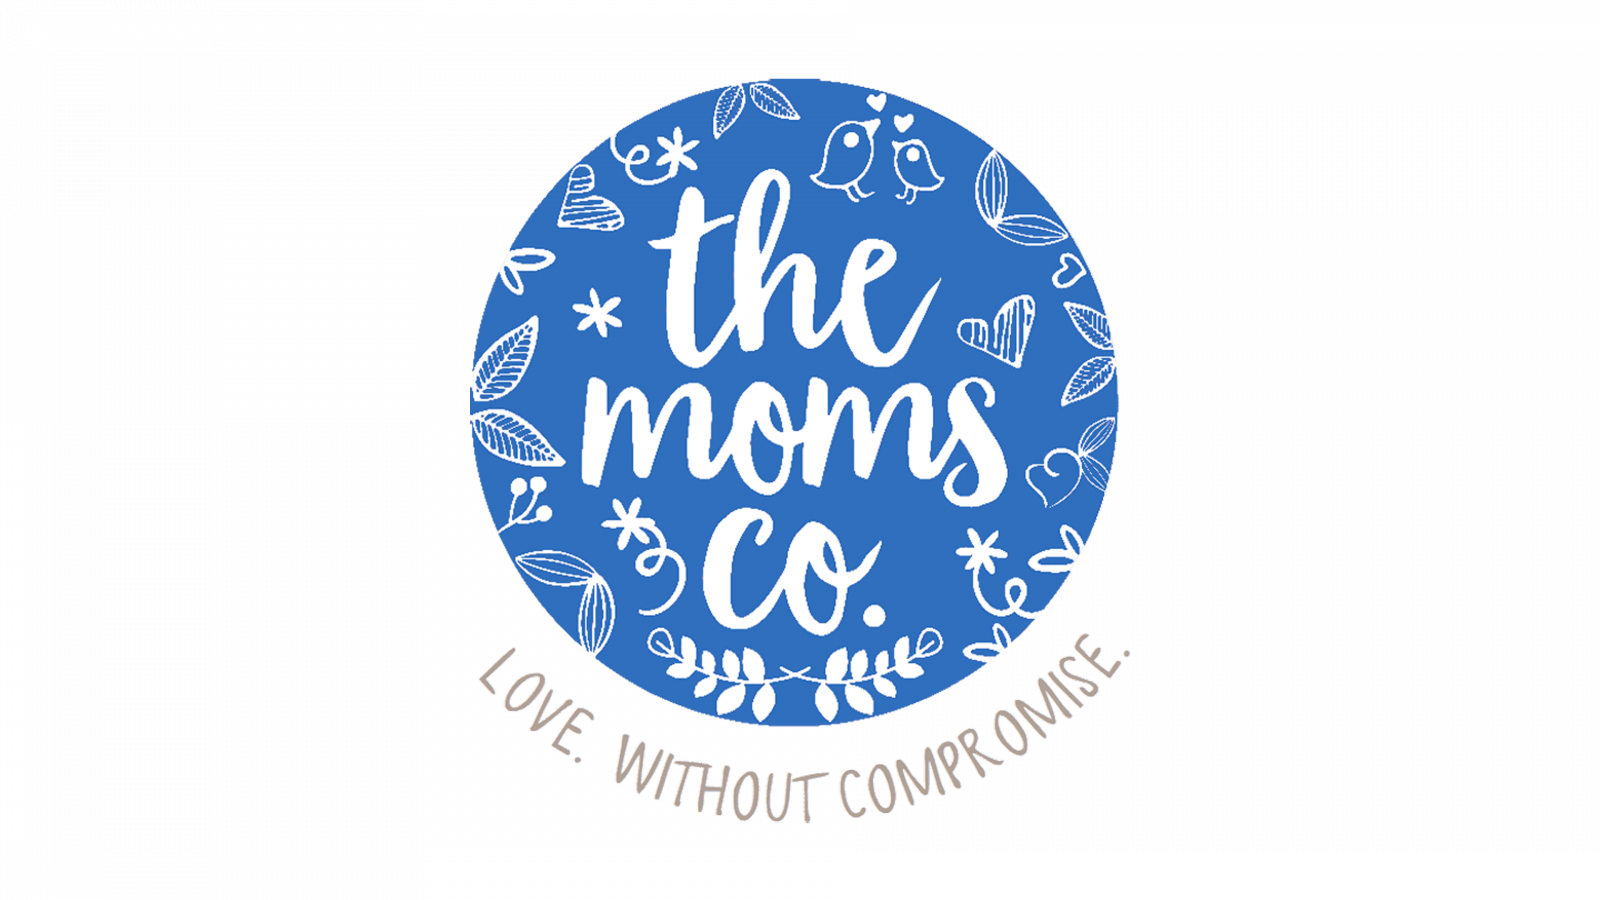 The Mom's Co